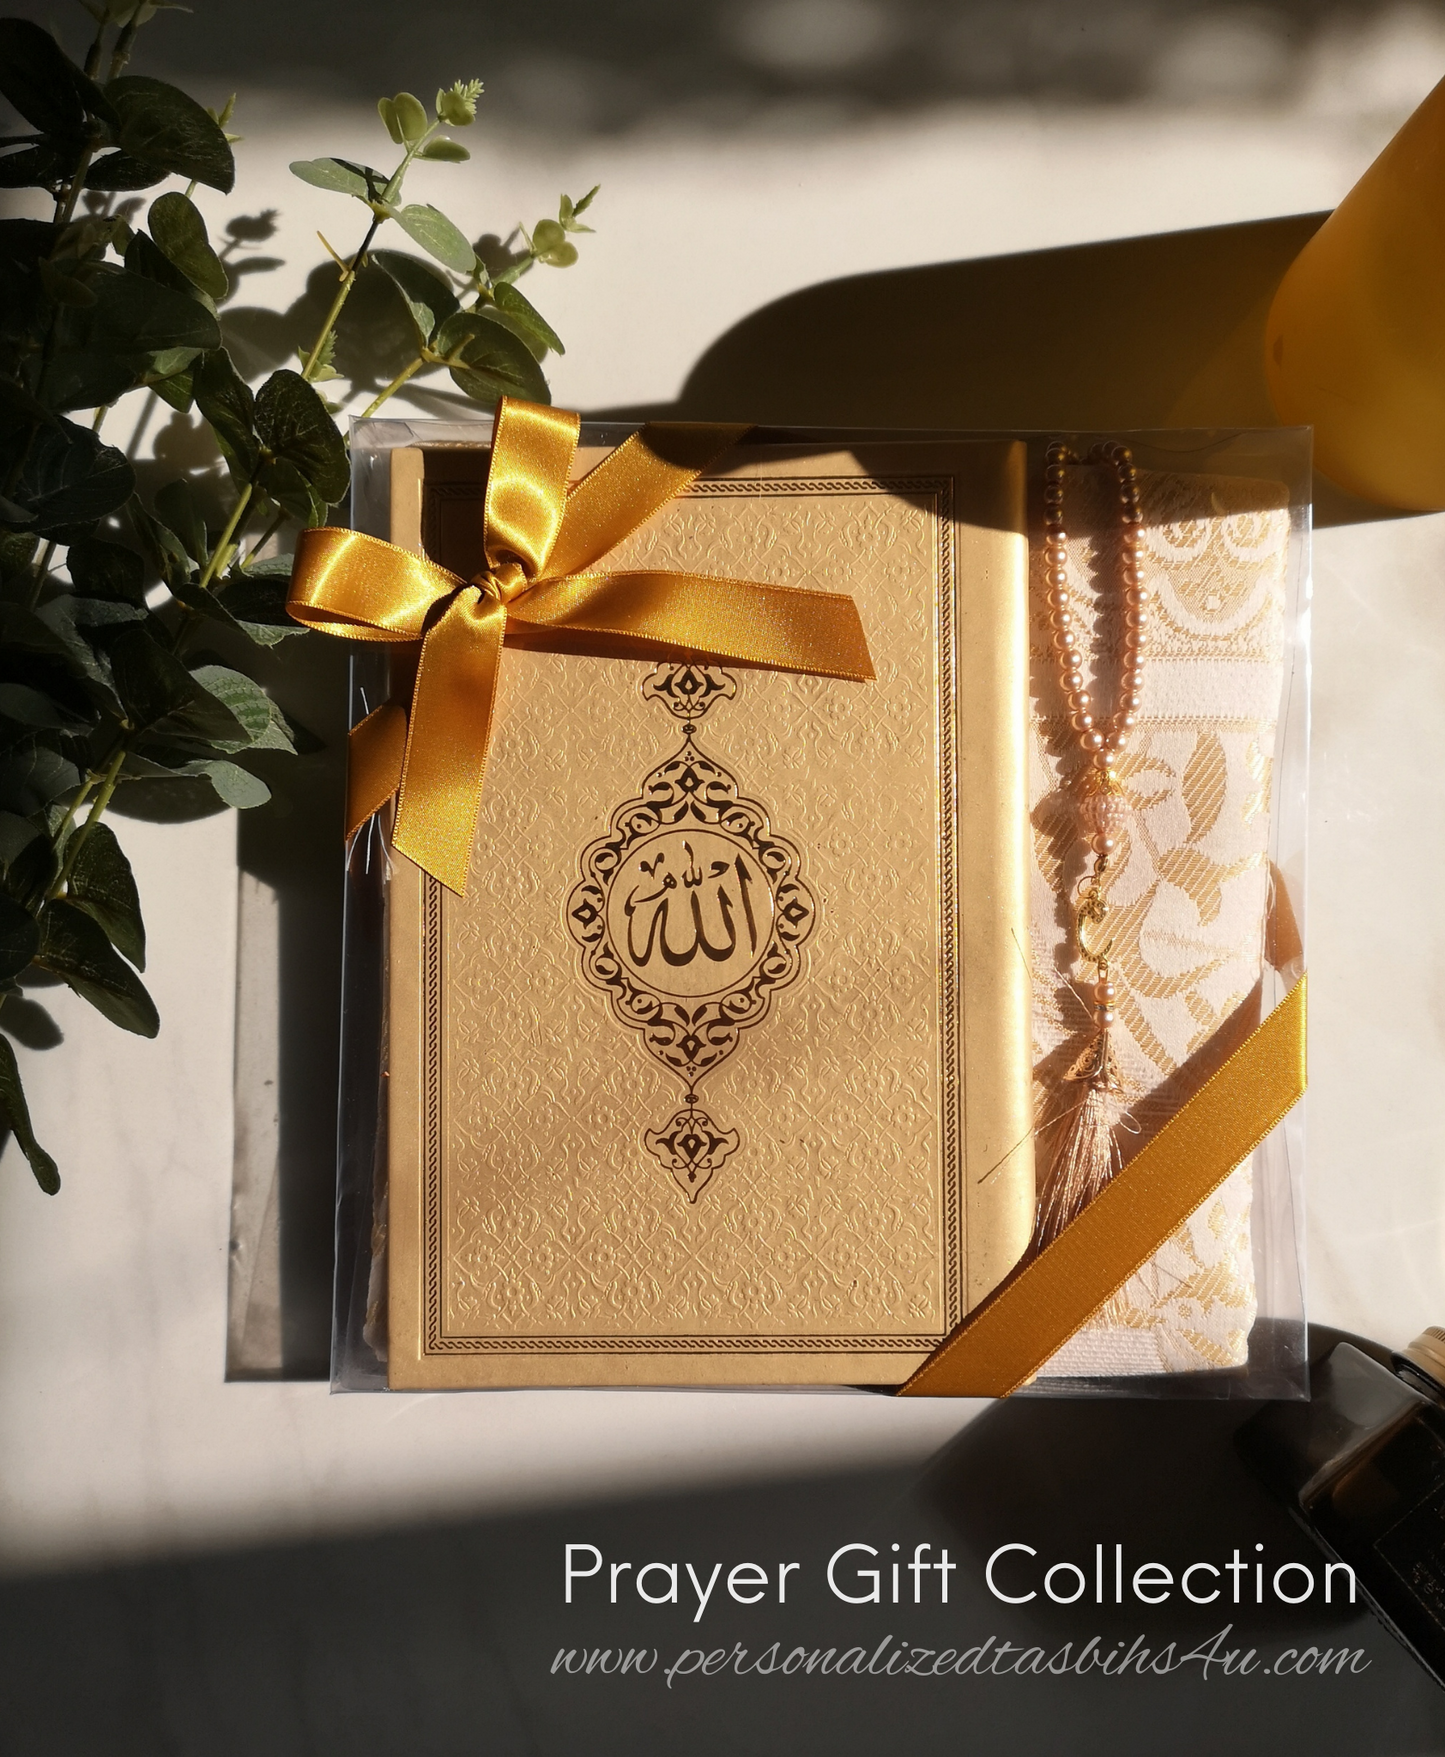 Prayer Gift Collection - 8 Colours to choose from!